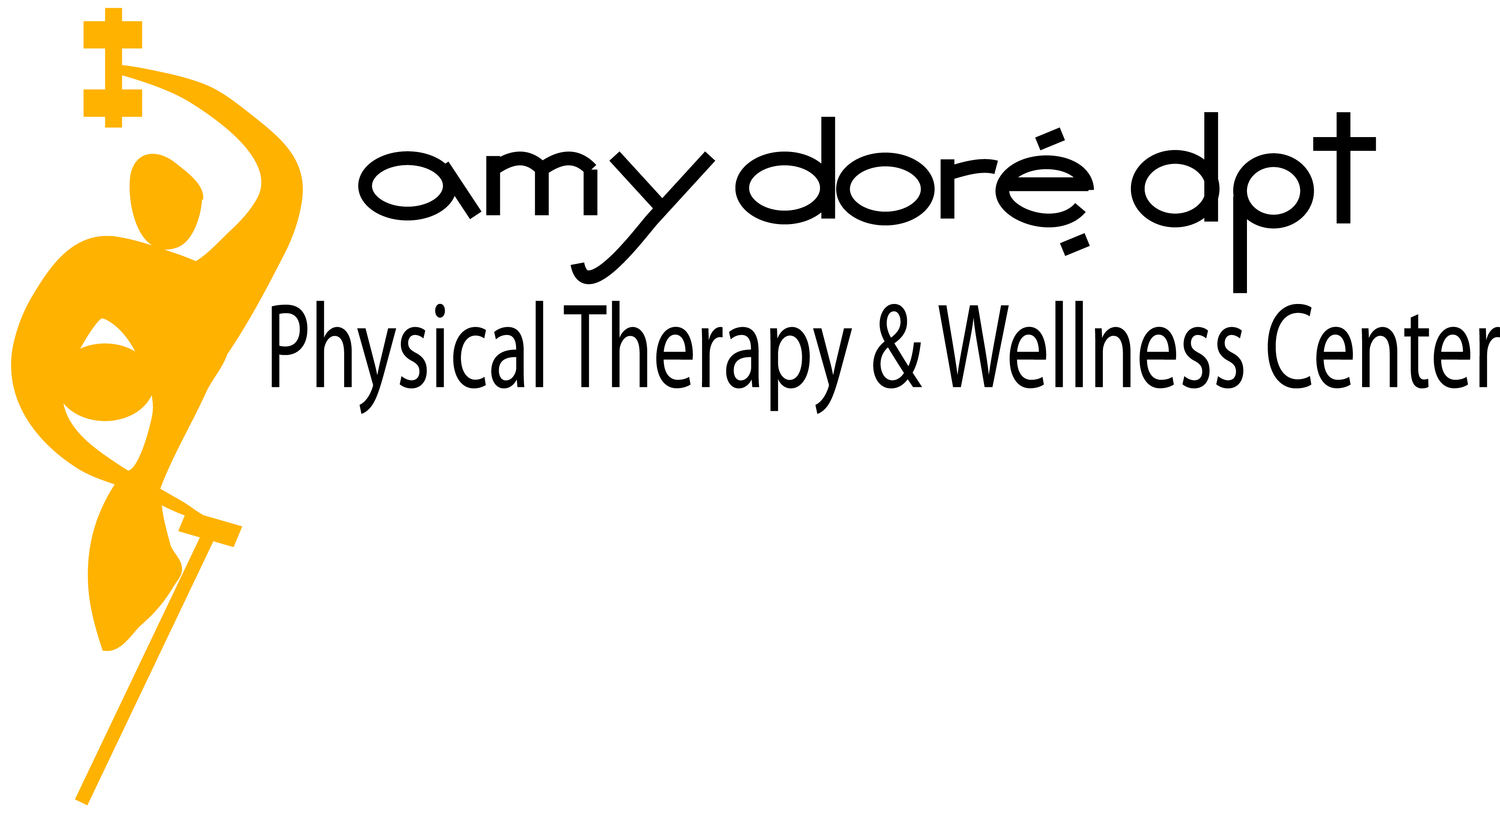 Amy Doré DPT Physical Therapy & Wellness Center